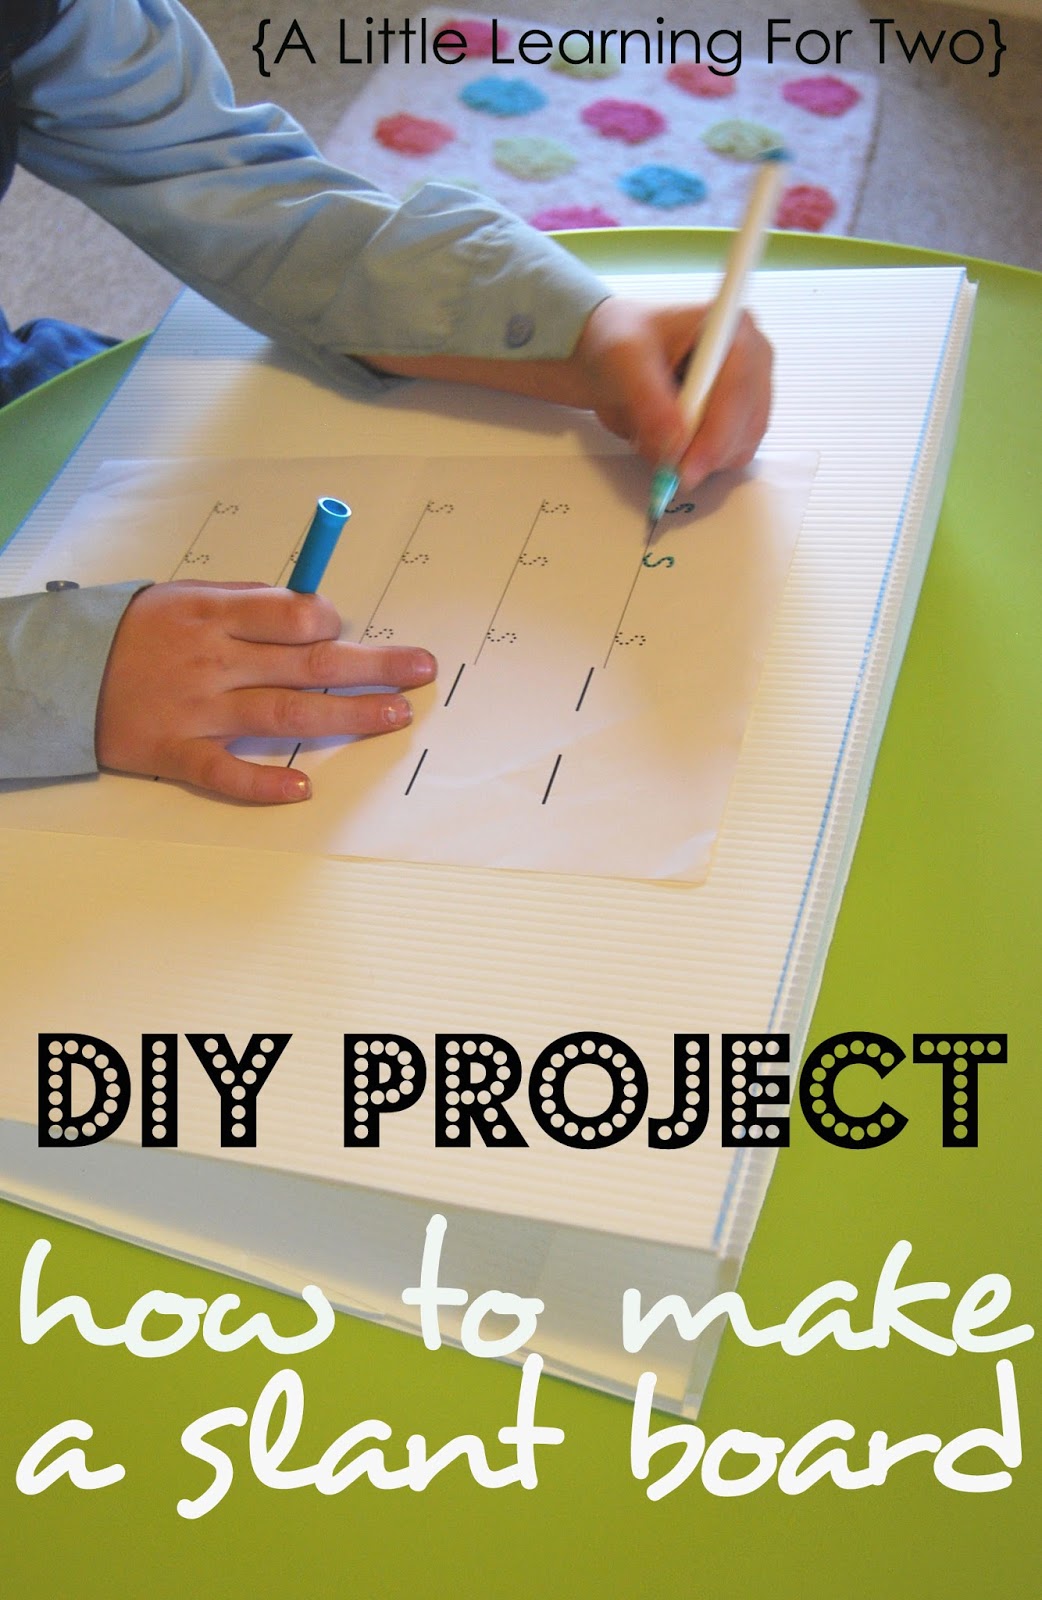 A Little Learning For Two: DIY : How To Make A Slant Board